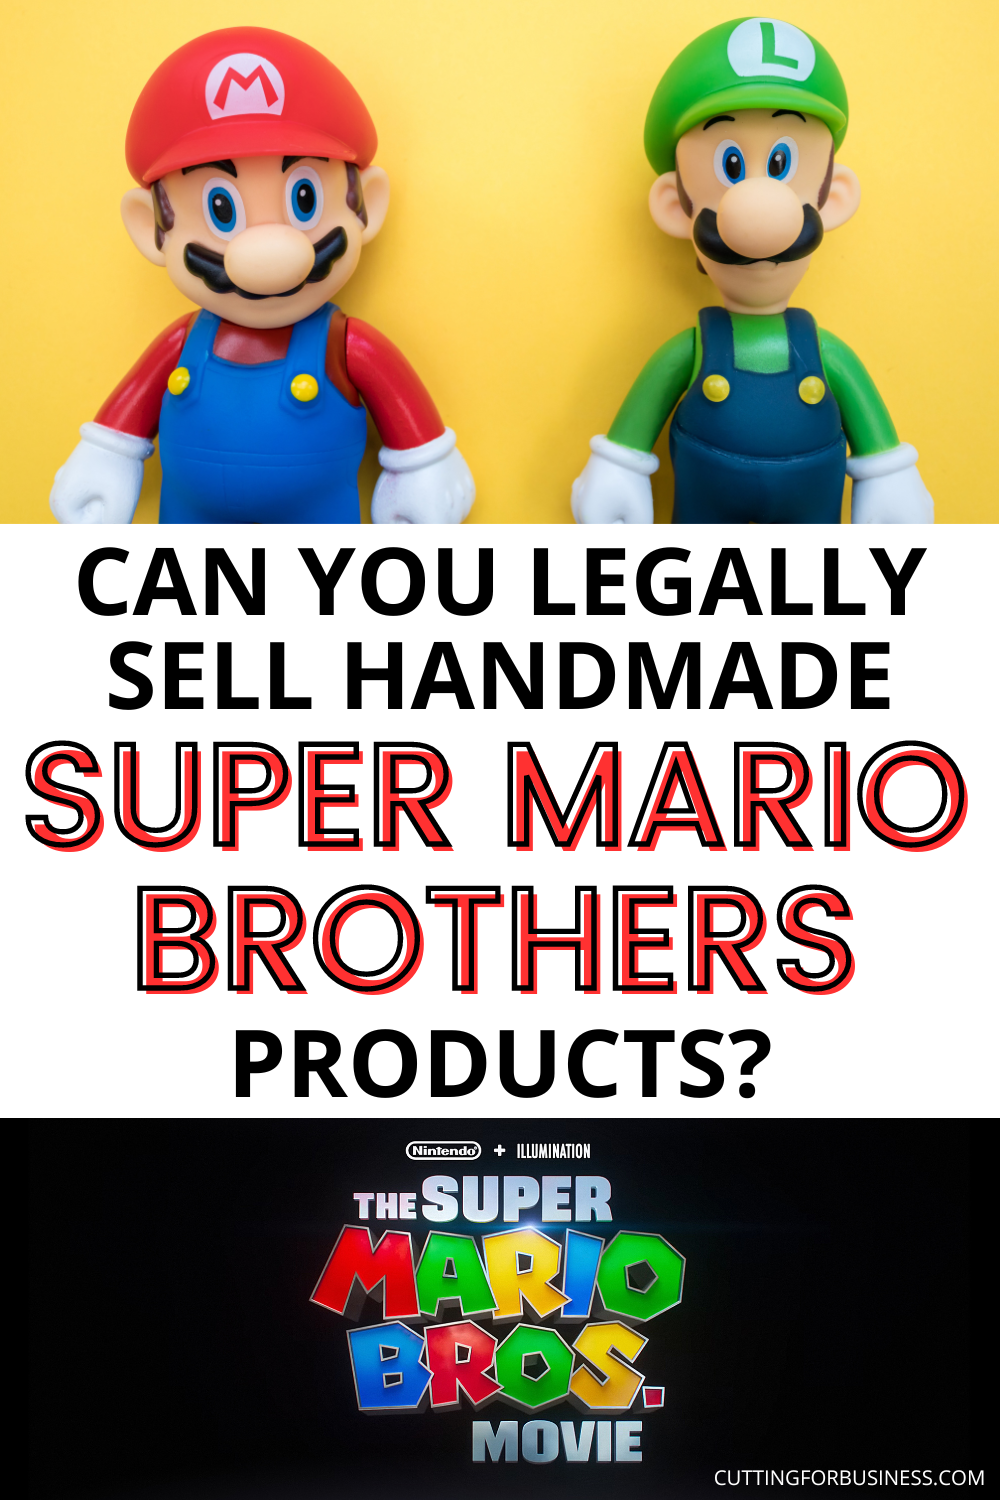 Can You Legally Sell Handmade Super Mario Brothers Products - A great read for crafters - by cuttingforbusiness.com.